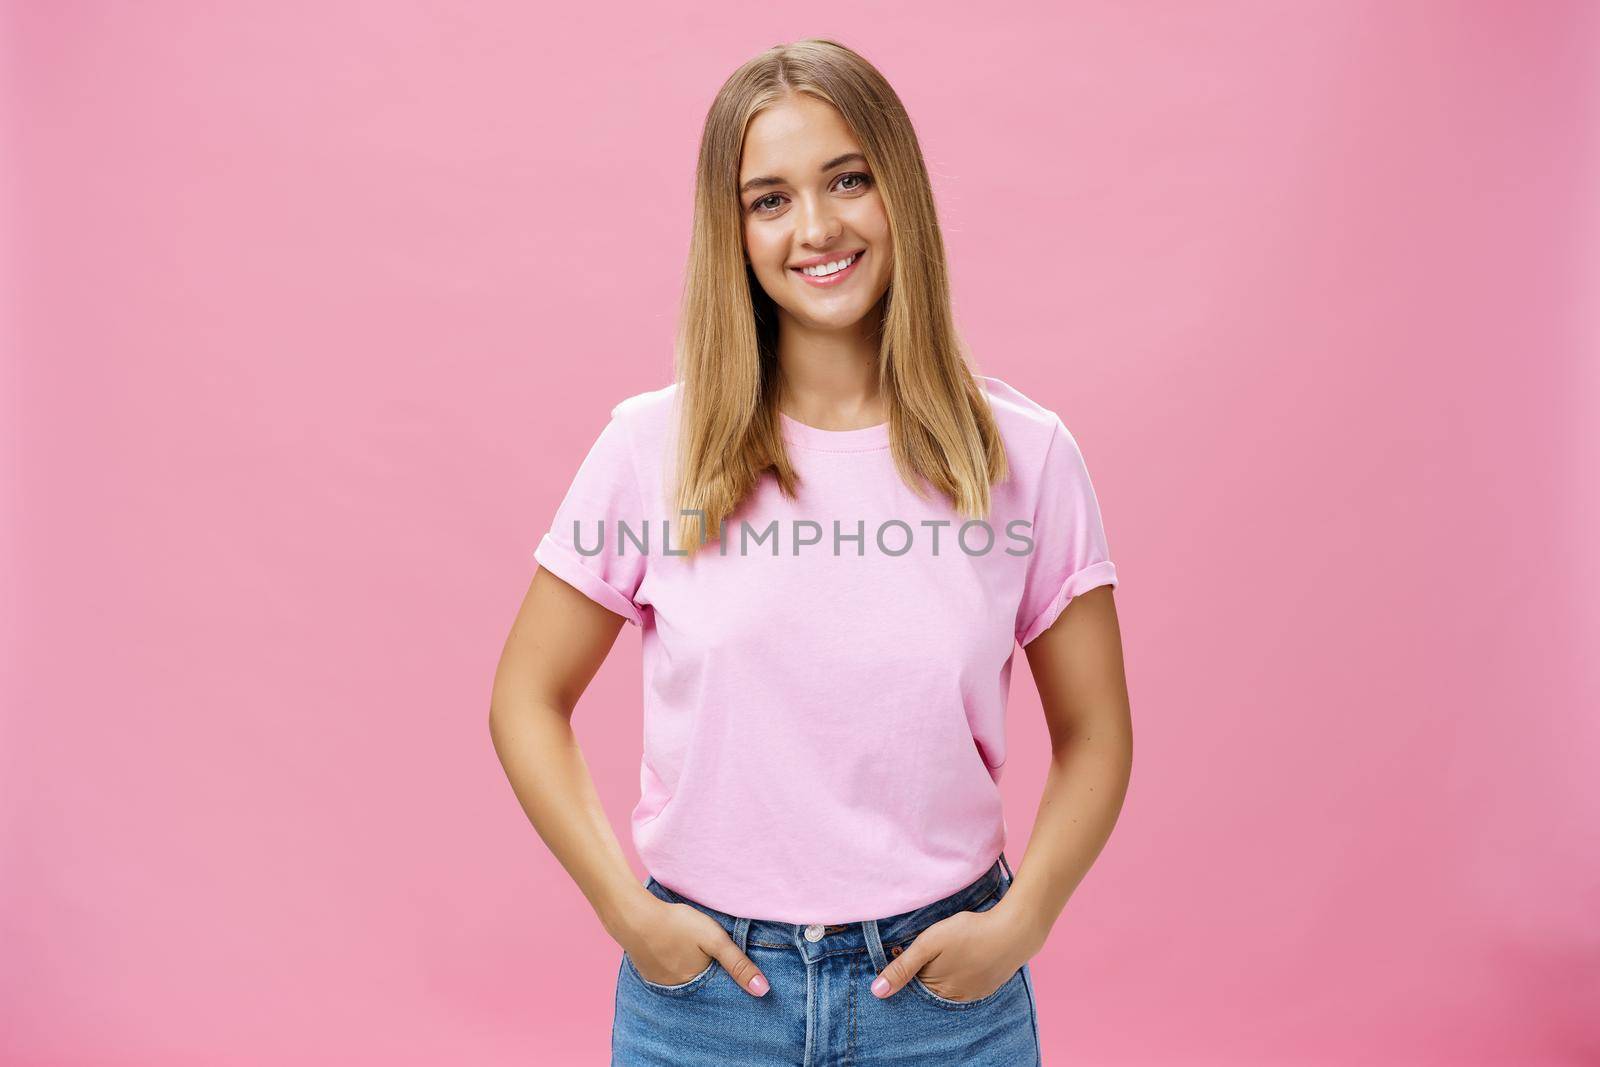 Charming pleasant woman with chubby face and fair hair in casual t-shirt smiling broadly holding hands in pockets being nice and friendly gazing carefree and calm at camera over pink background. Lifestyle.